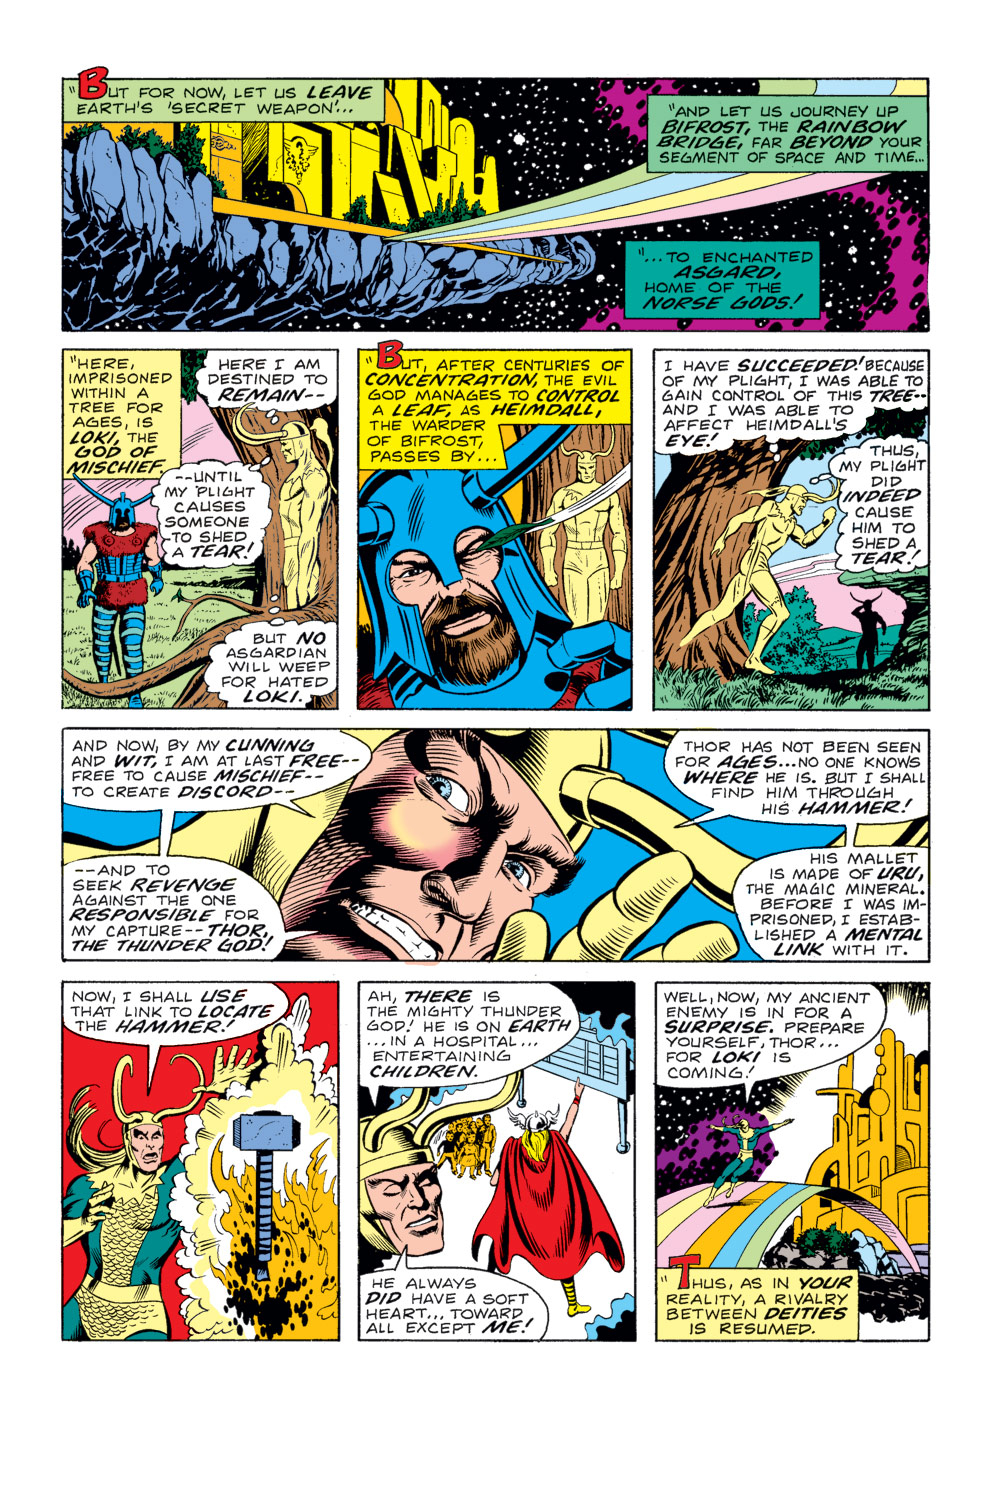 What If? (1977) issue 10 - Jane Foster had found the hammer of Thor - Page 12